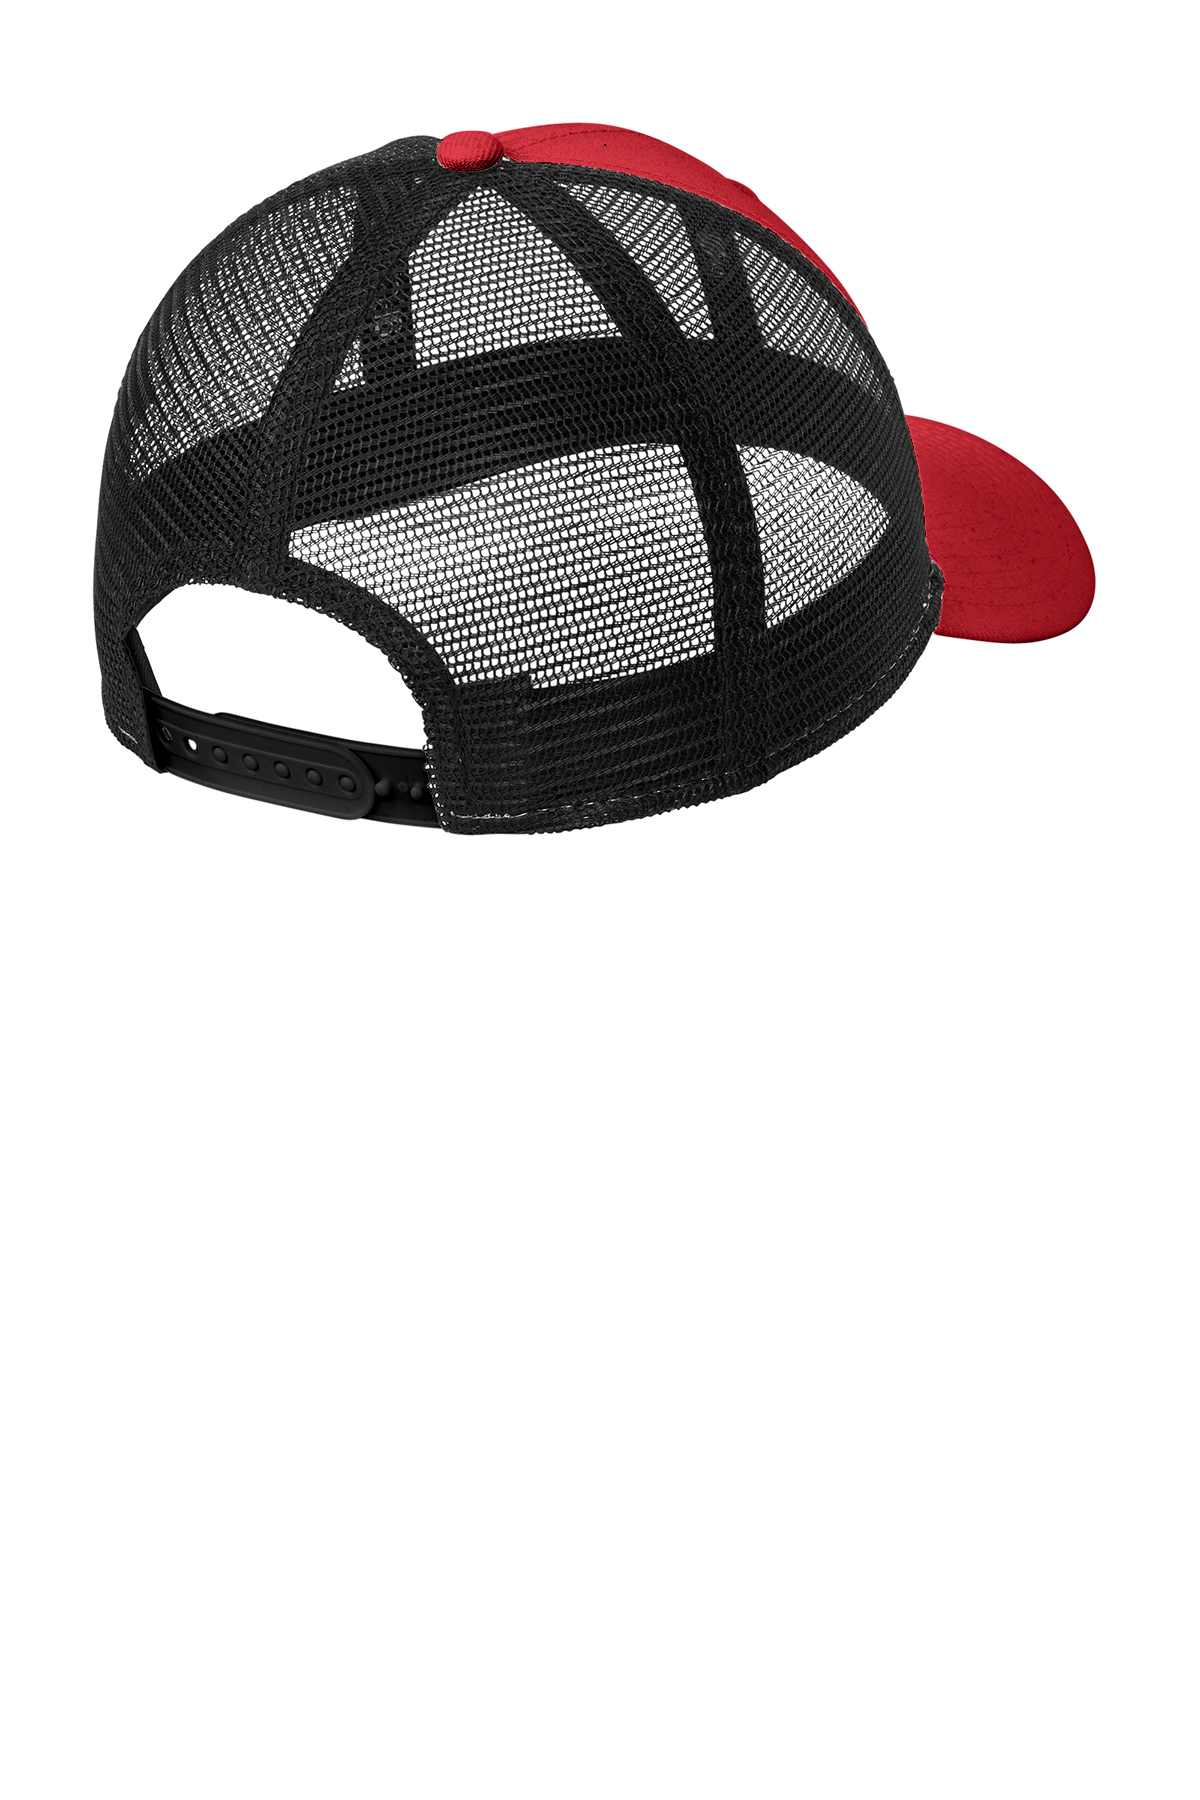 D'Youville Physical Therapy NE208 New Era® Recycled Snapback Cap